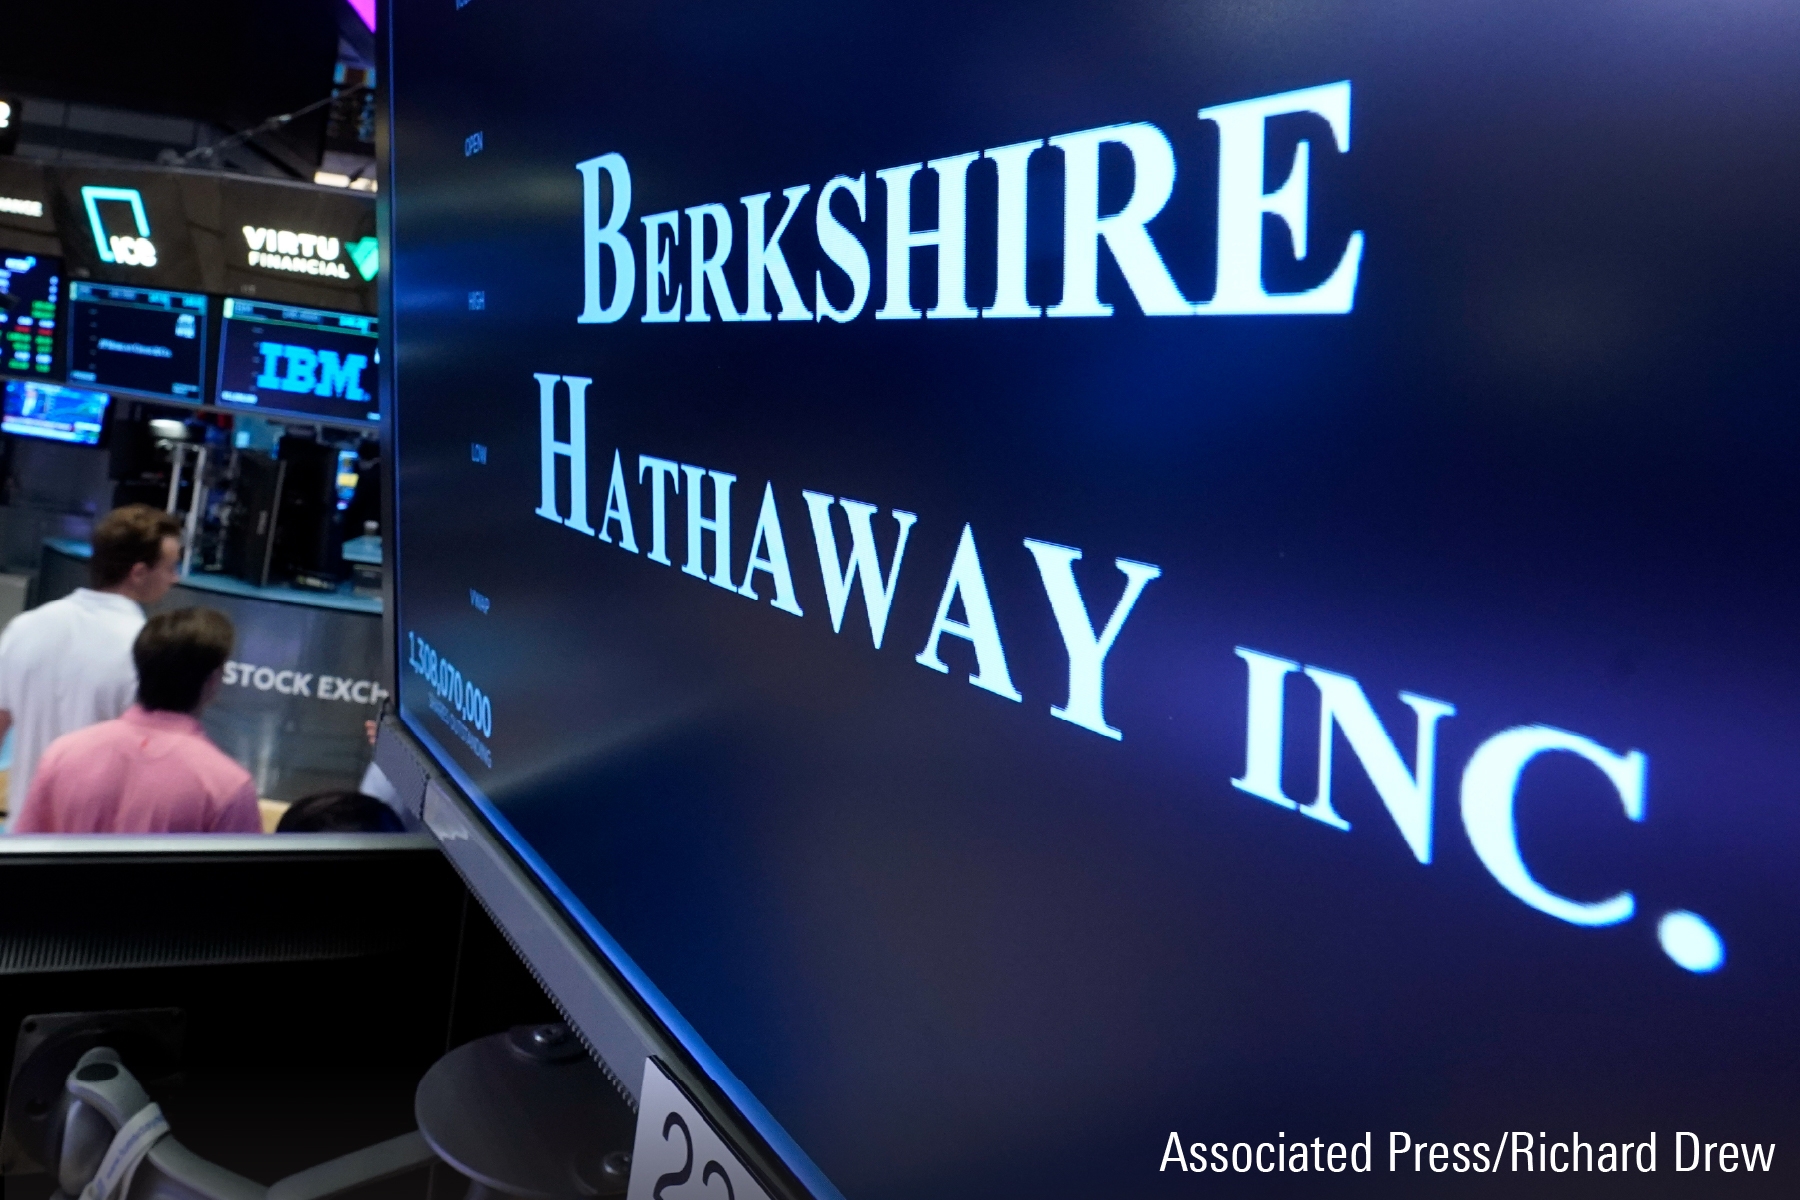 A Look at Berkshire Hathaway's Q1 Earnings